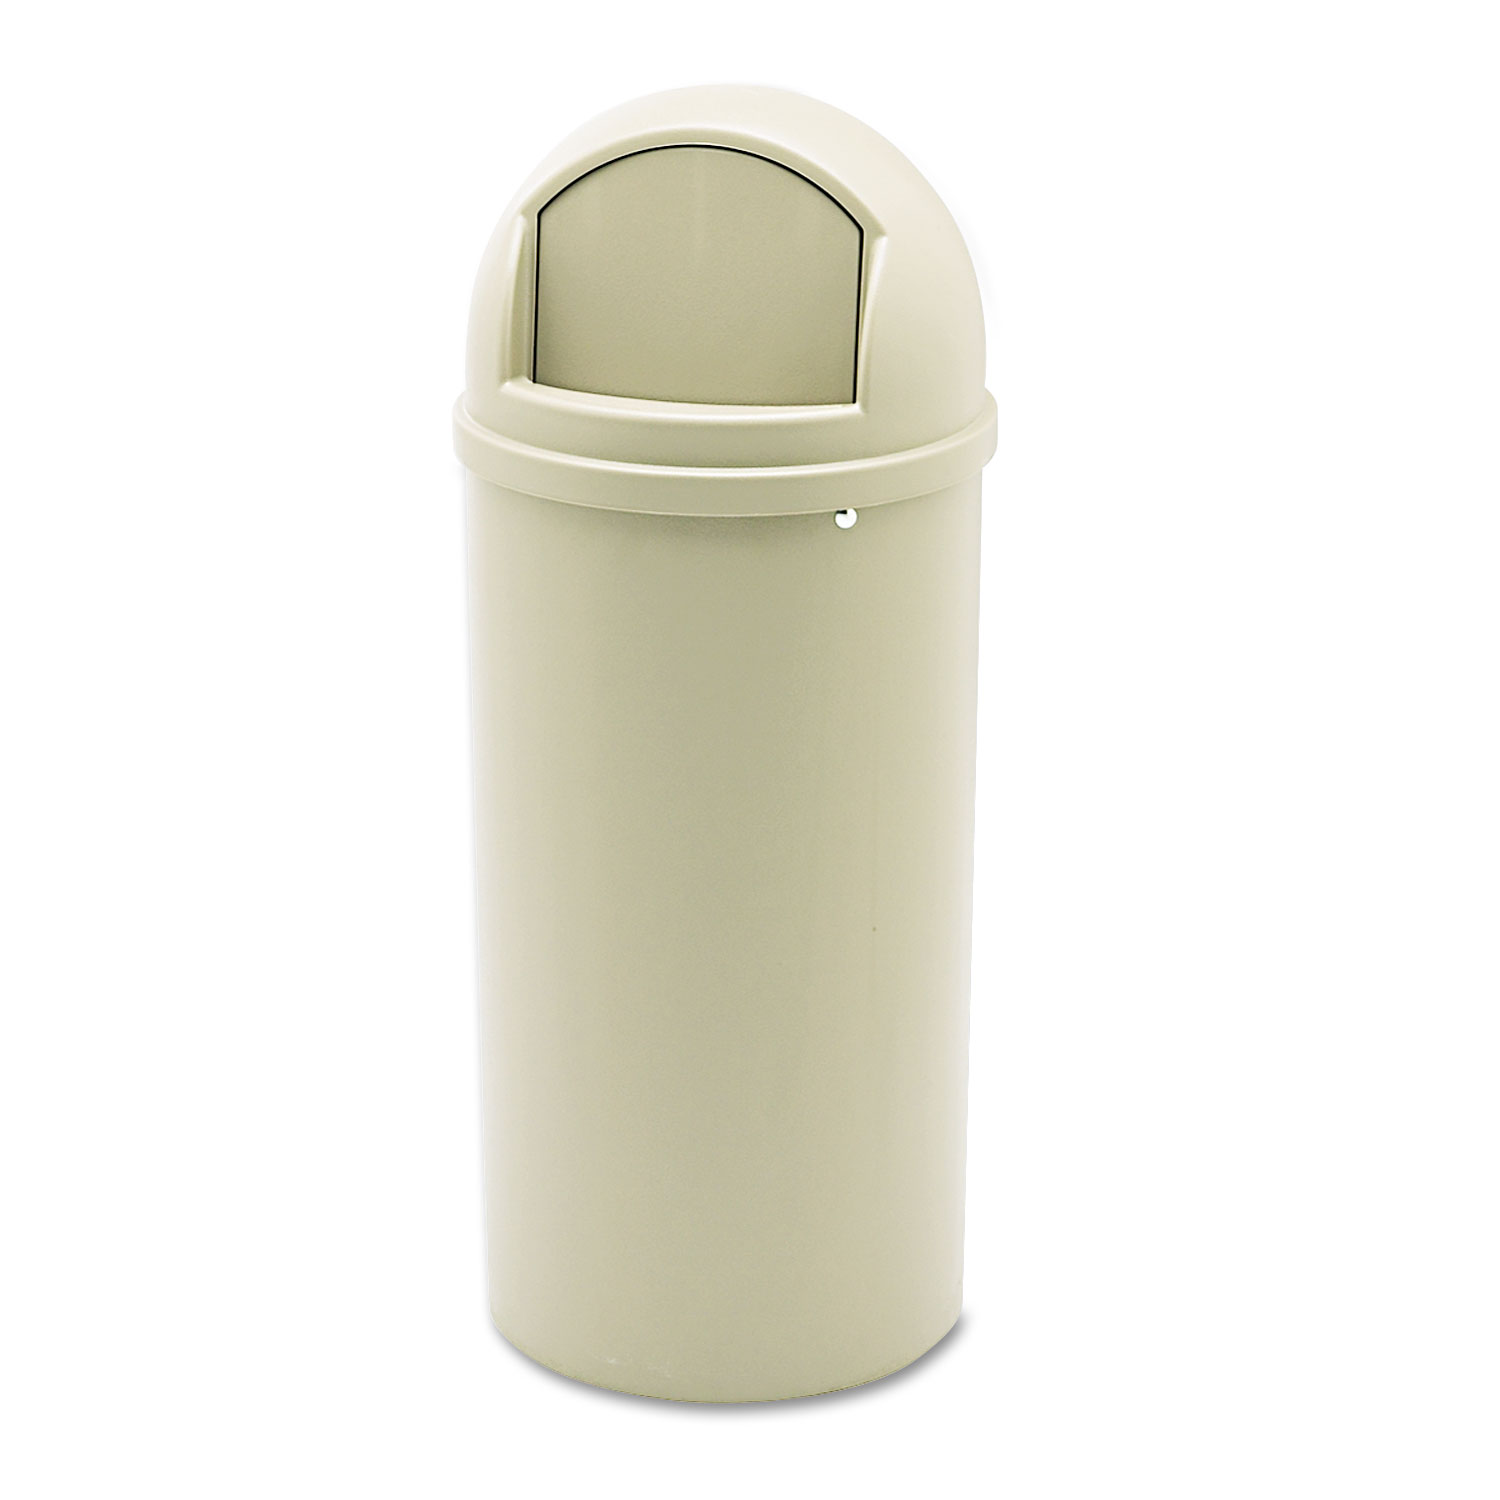  Rubbermaid Commercial FG816088BEIG Marshal Classic Container, Round, Polyethylene, 15 gal, Beige (RCP816088BG) 